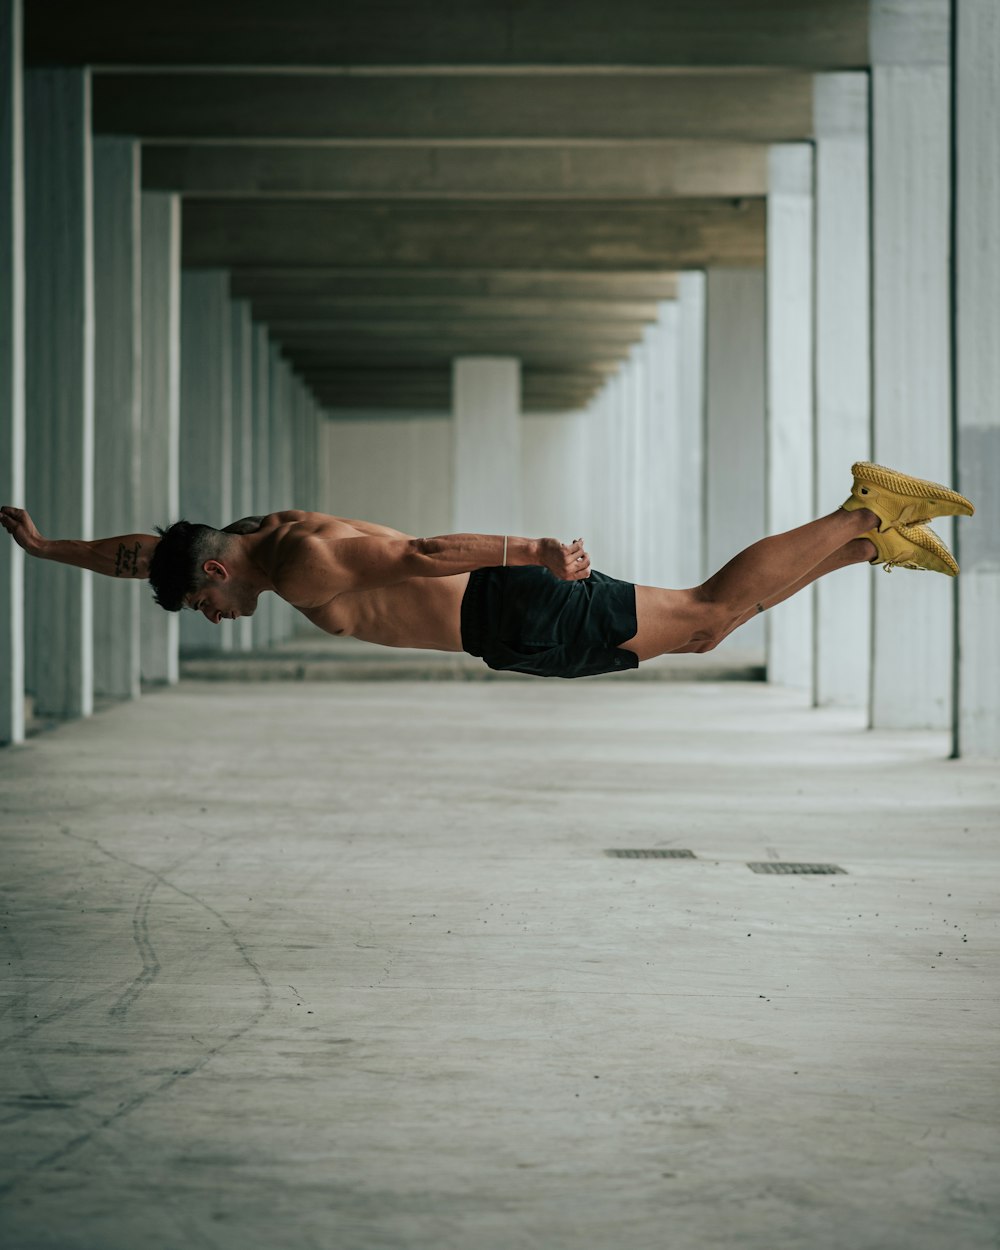 a shirtless man is diving in a parking garage